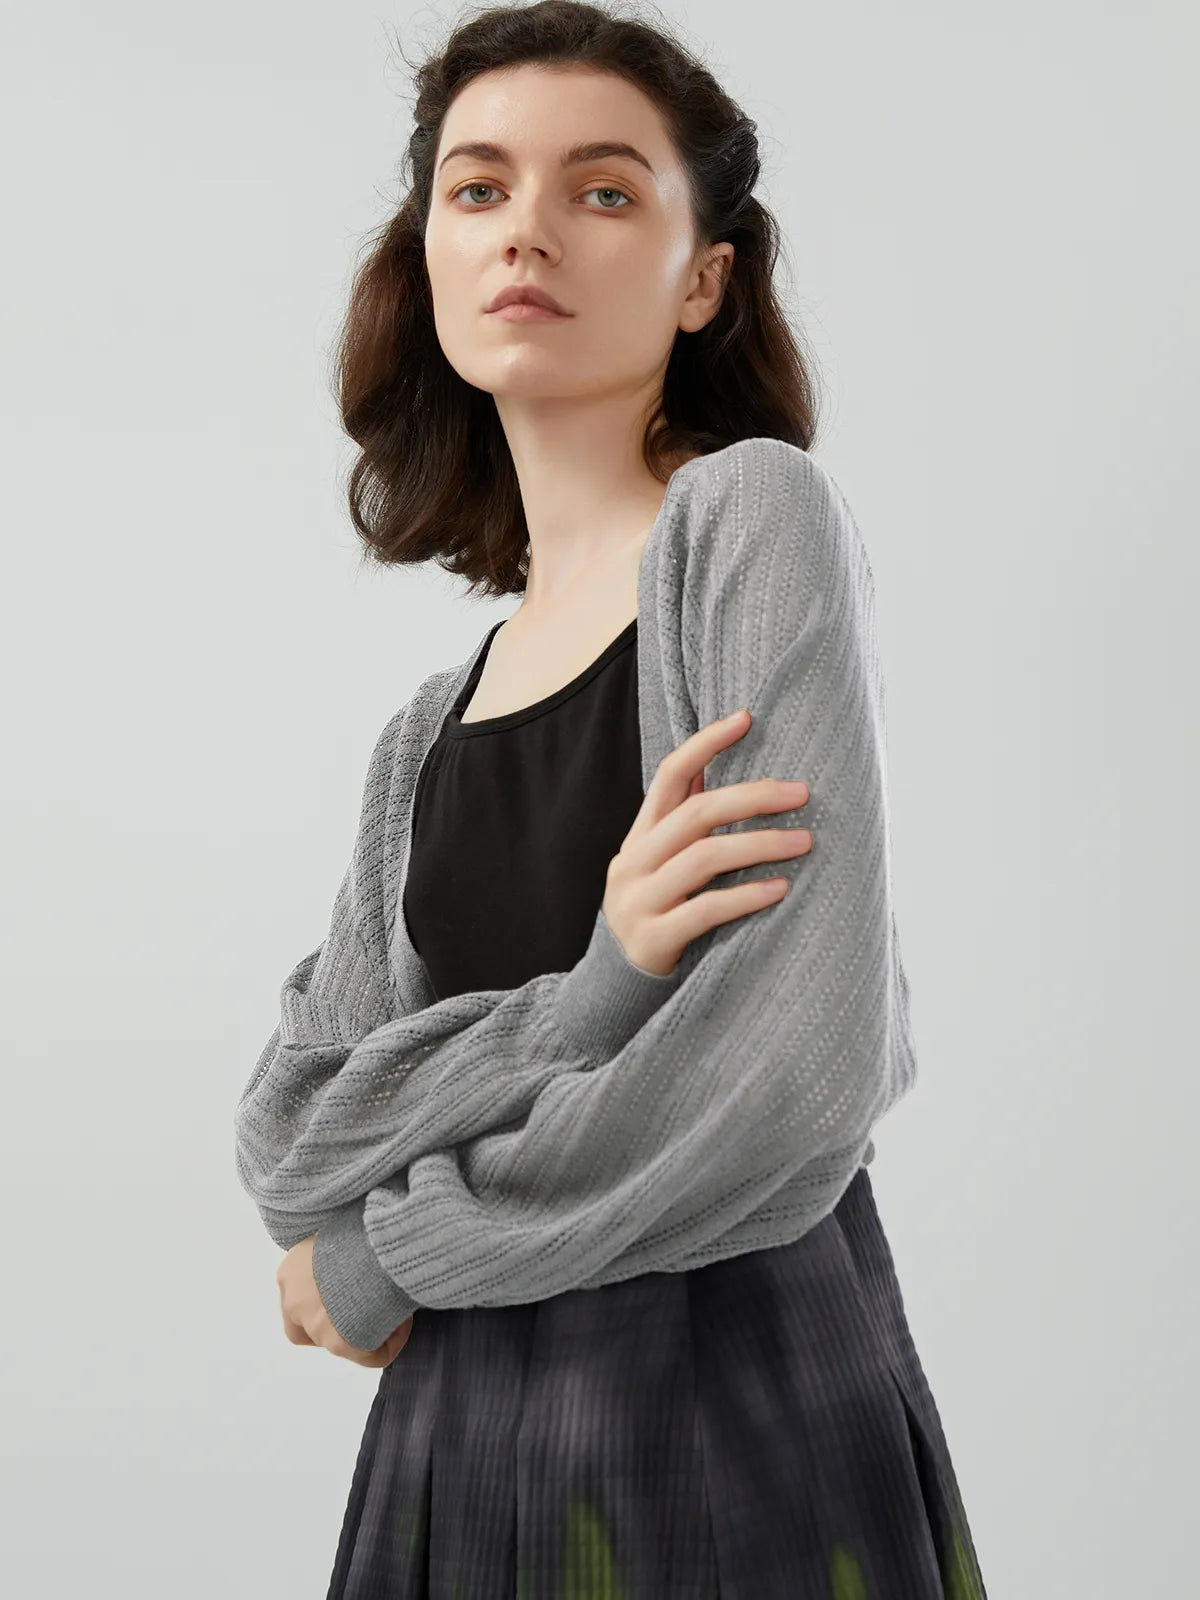 Comfortable material and unique appearance of vintage textured knit sweater